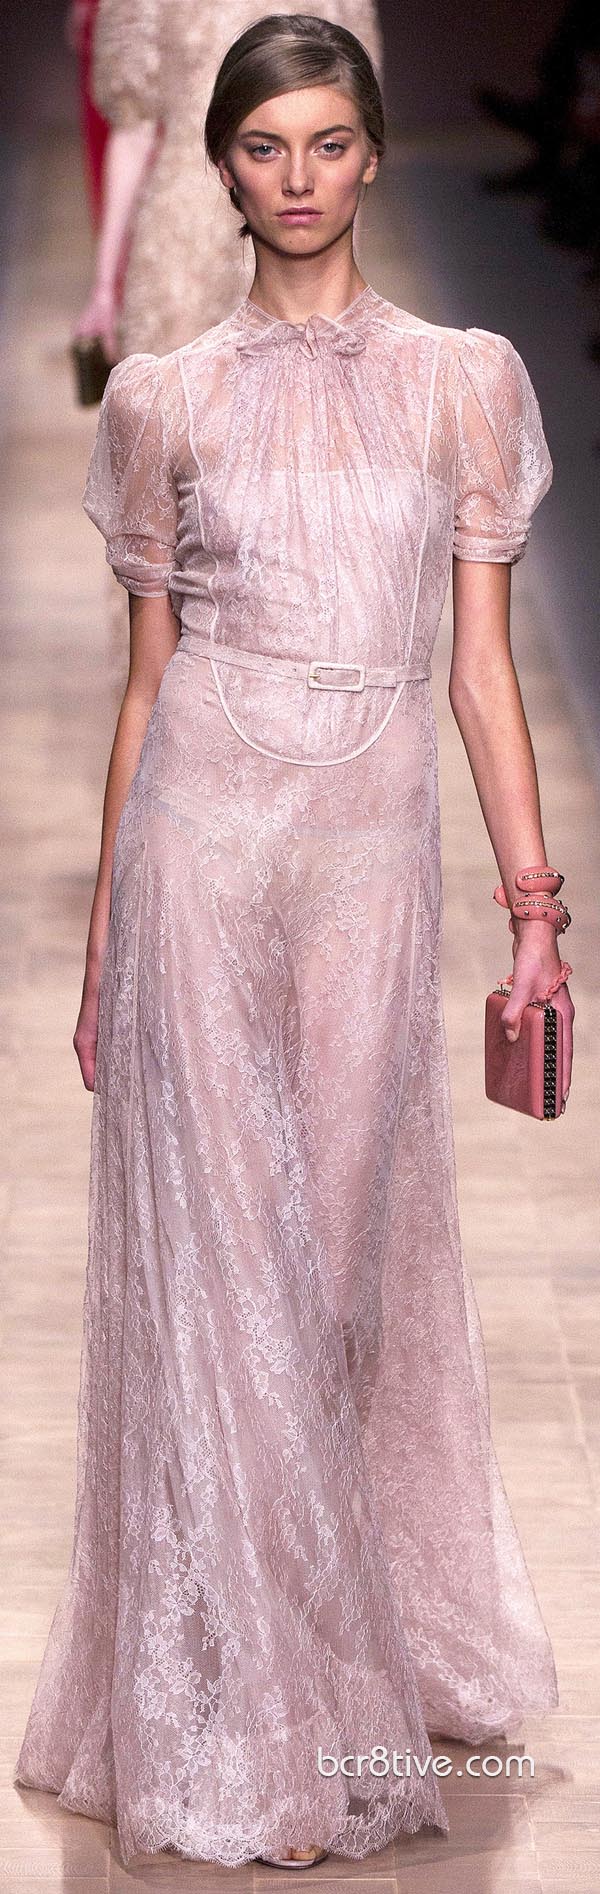 Valentino Spring Summer 2013 Ready To Wear Collection - Evening Gown